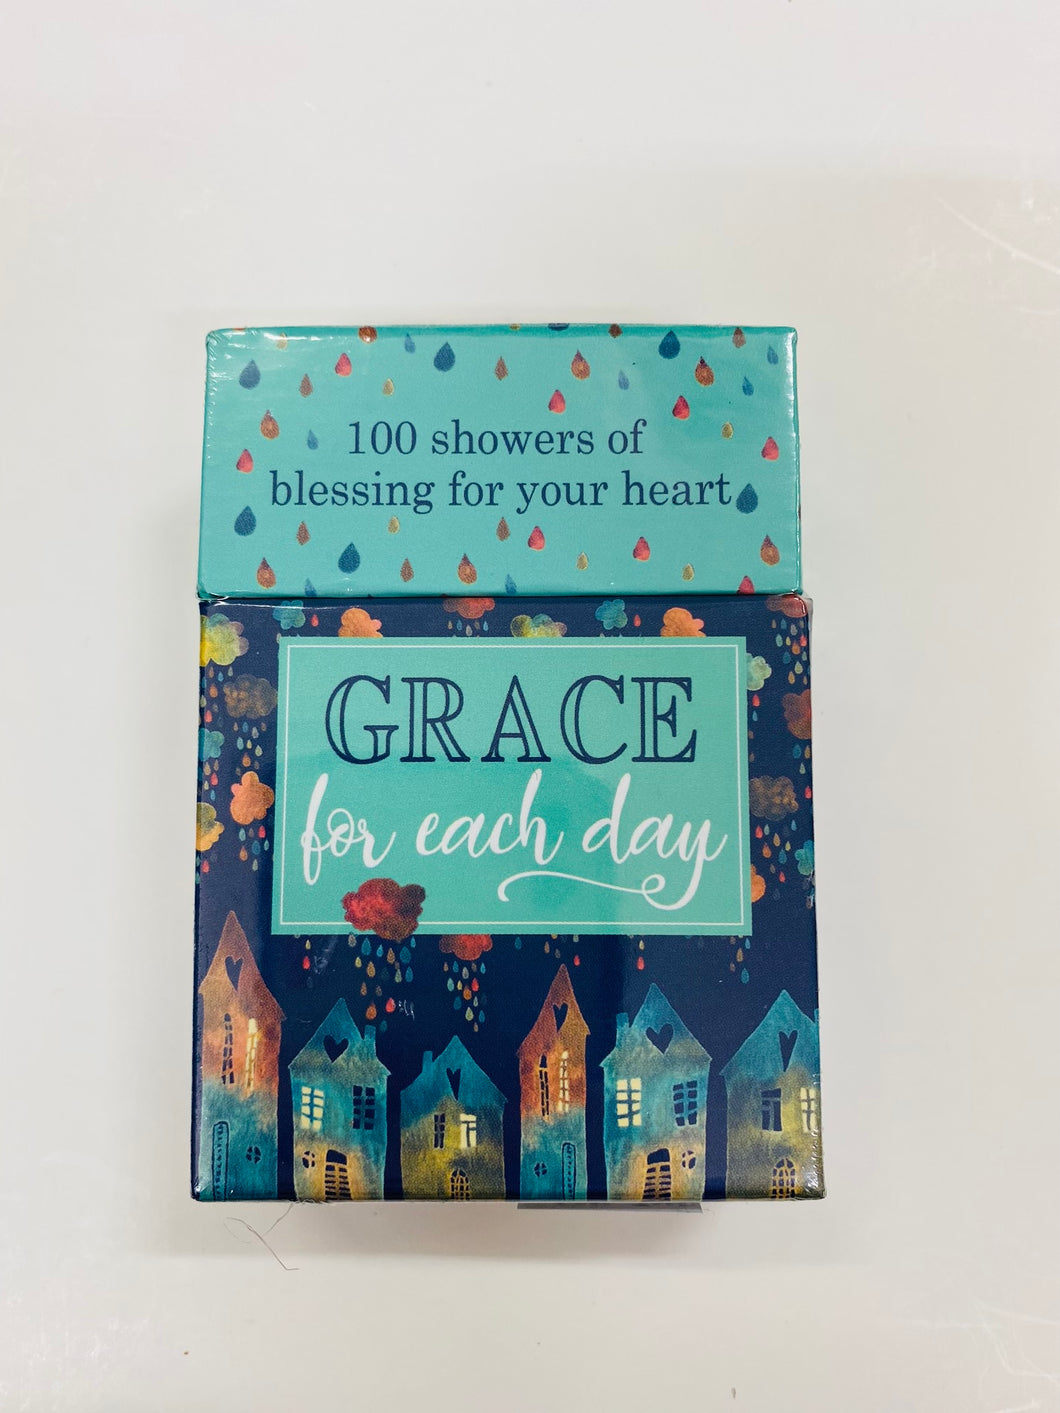 Inspirational Wallet Cards: 100 Showers of Blessings for your heart: Grace for Each Day